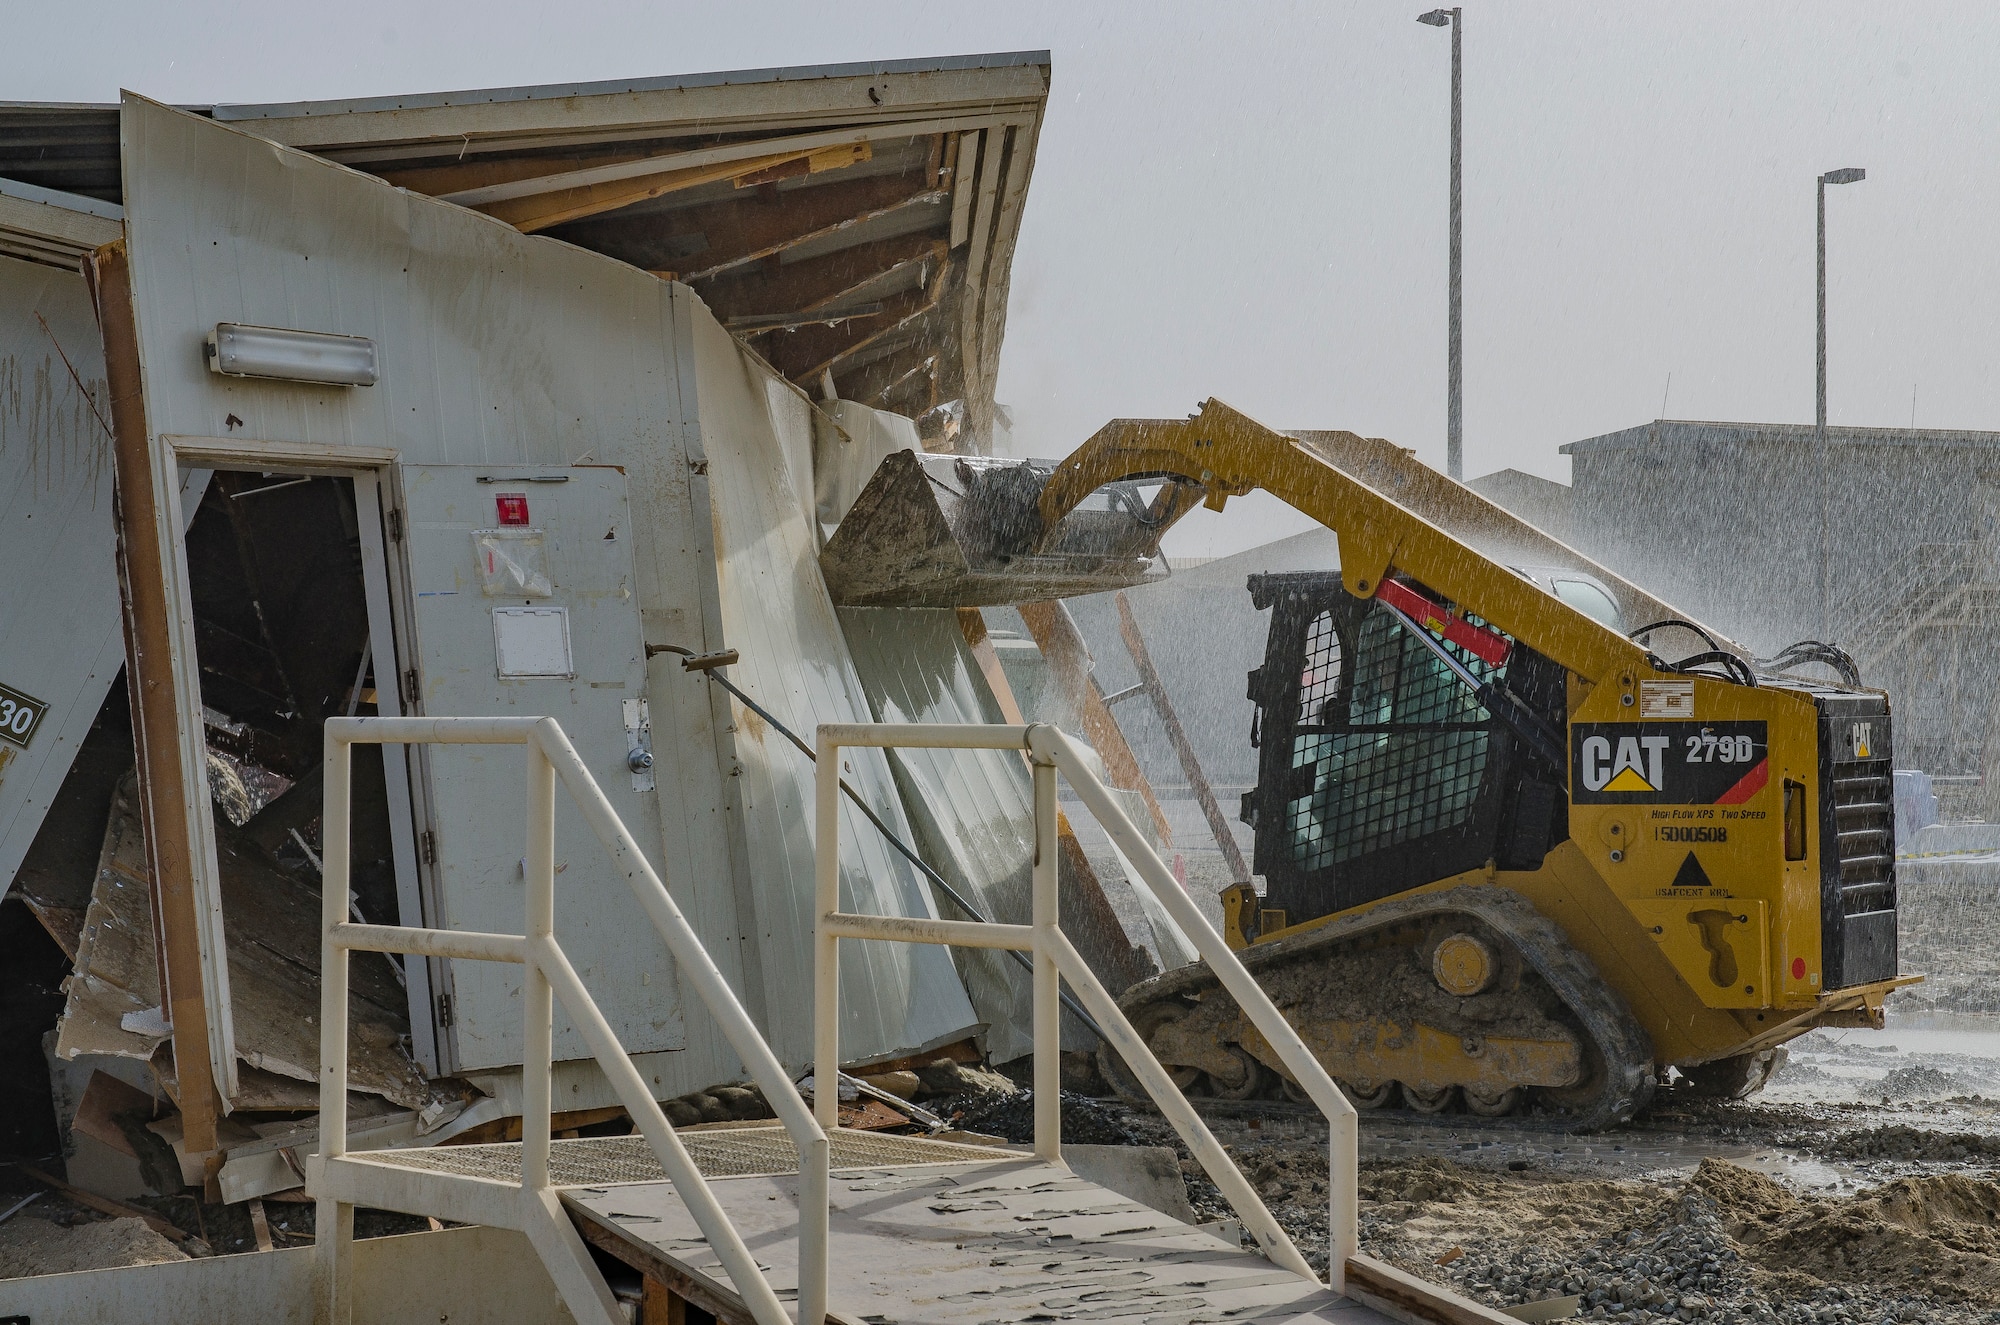 Master Sgt. Gregory Lund, heavy equipment shop chief, demolishes a building at Al Dhafra Air Base, United Arab Emirates, May 9, 2018. Heavy equipment operators construct runways and airfields in remote global locations in addition to maintaining facilities already in use.   (U.S. Air National Guard photo by Staff Sgt. Ross A. Whitley)